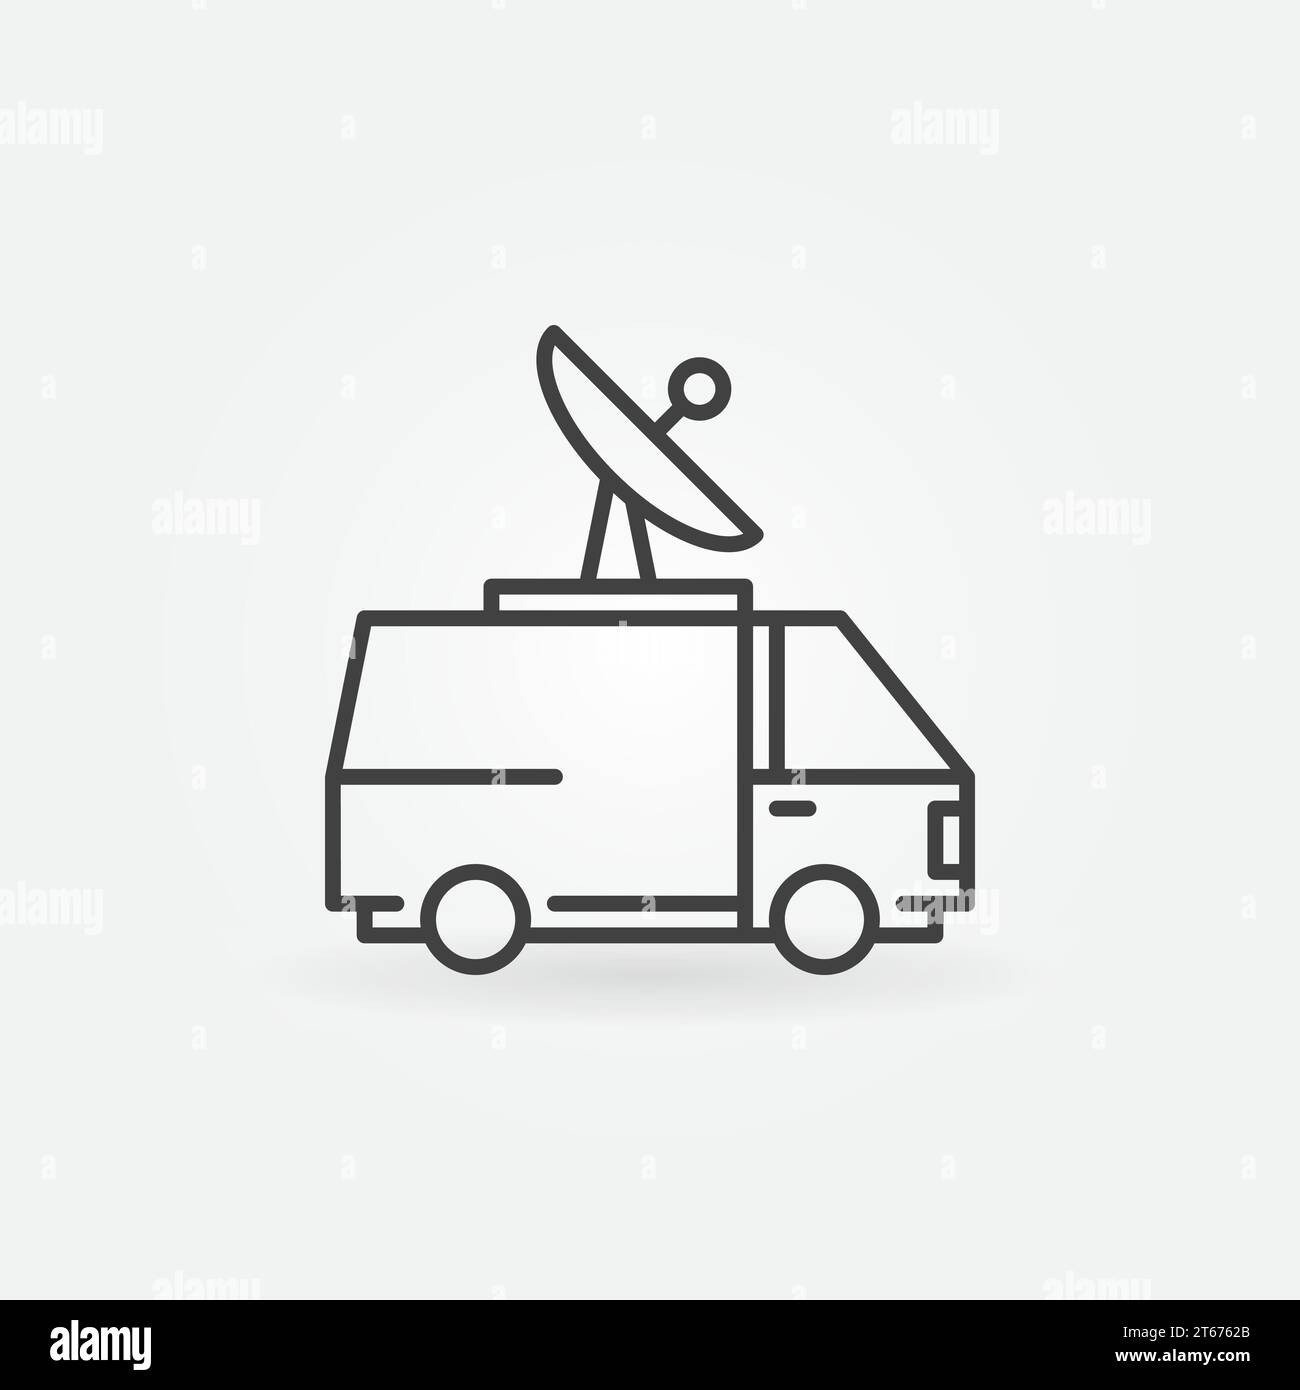 News van icon. Vector minimal outside broadcasting van sign or logo element in thin line style Stock Vector